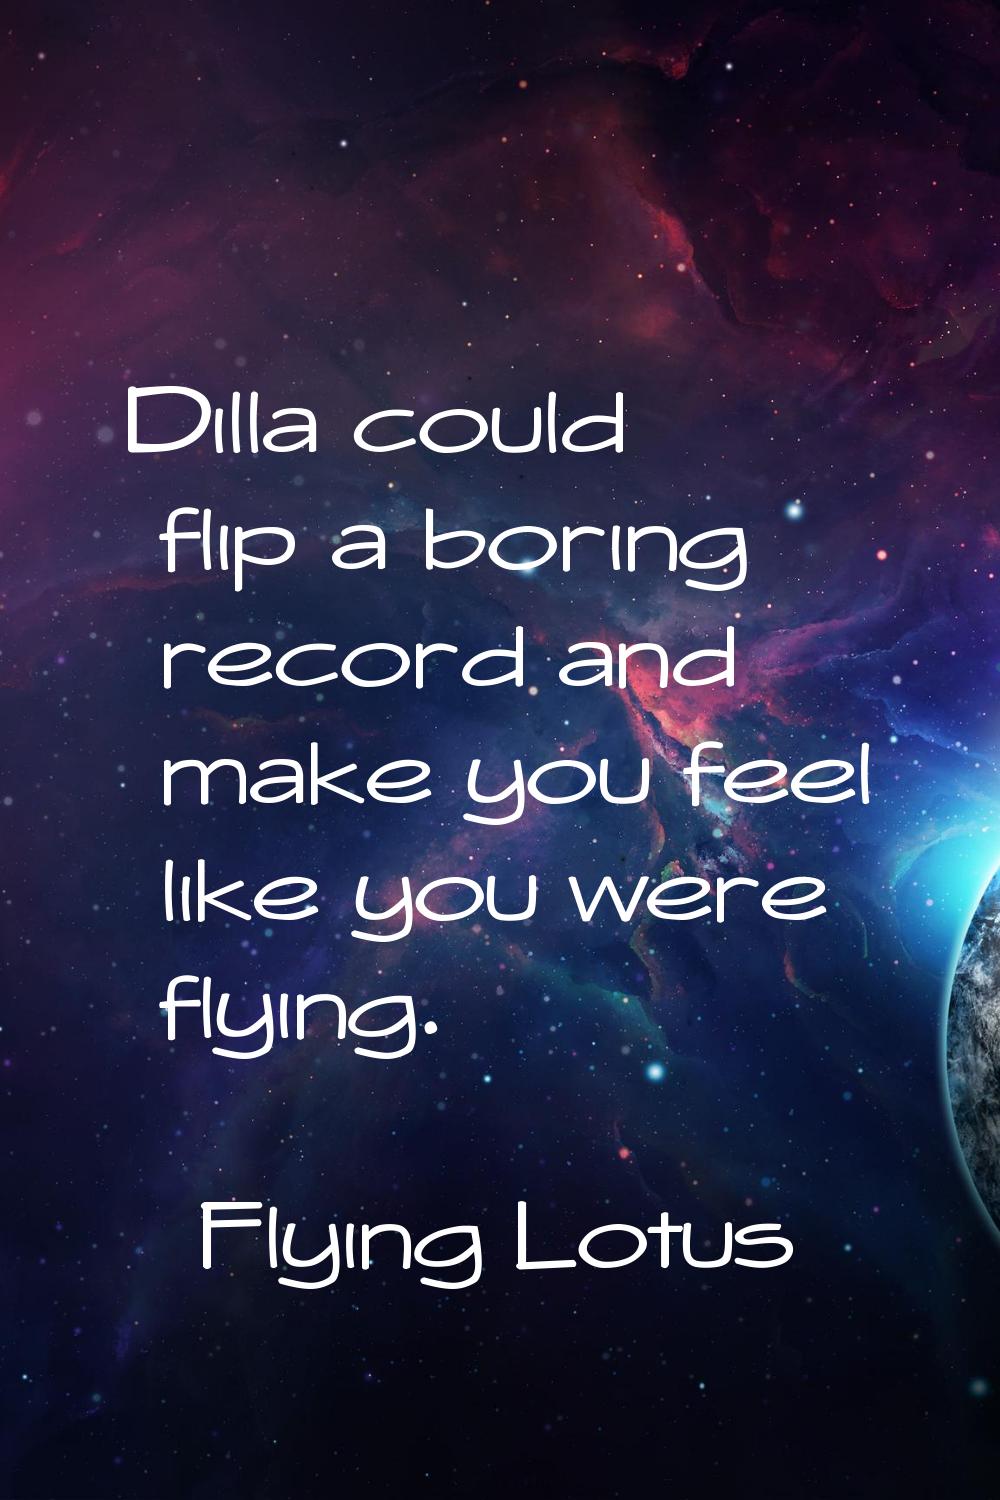 Dilla could flip a boring record and make you feel like you were flying.